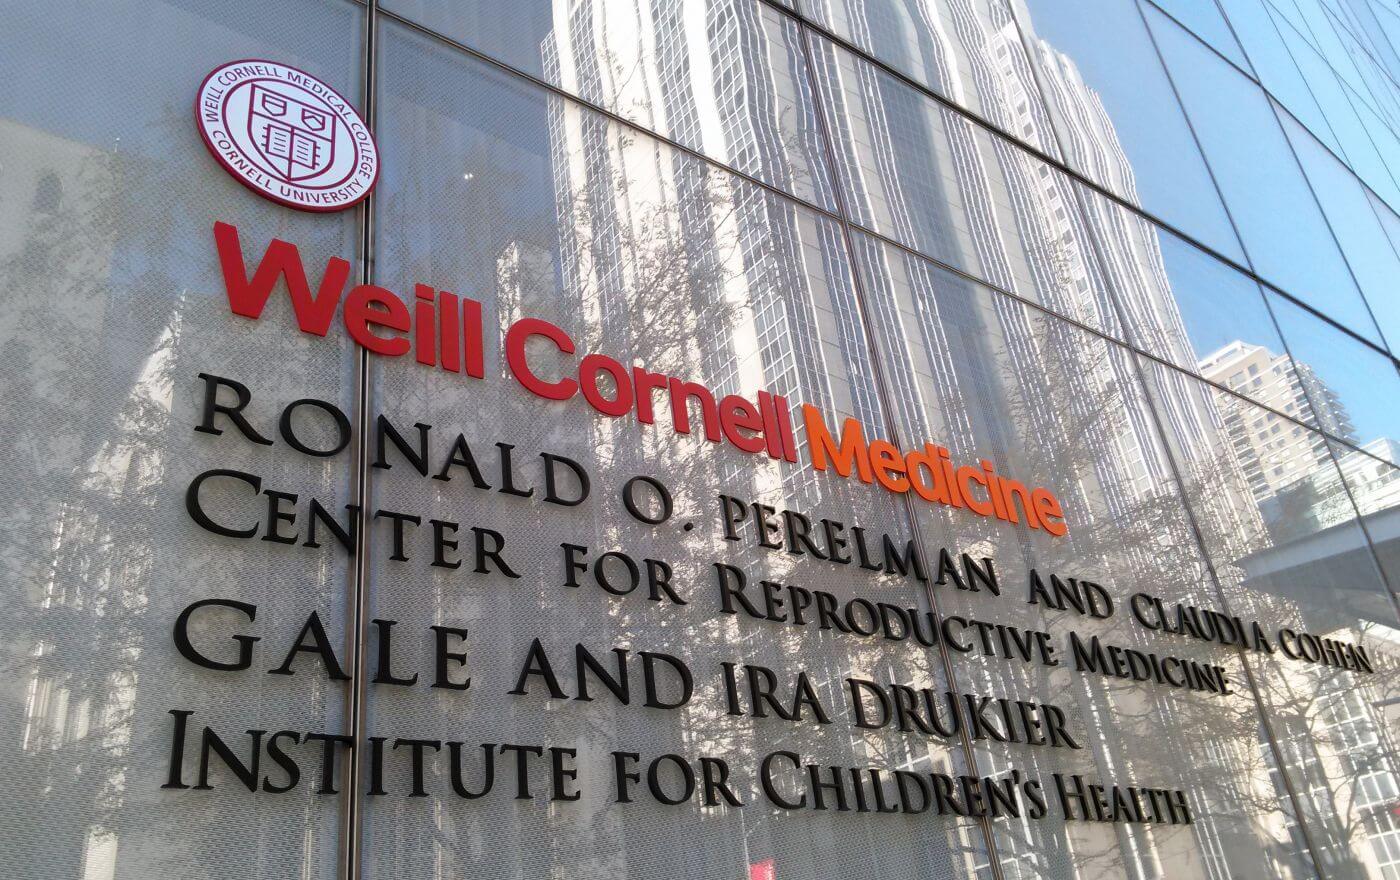 Ronald O. Perelman and Claudia Cohen Center for Reproductive Medicine at Weill Cornell Medical Center